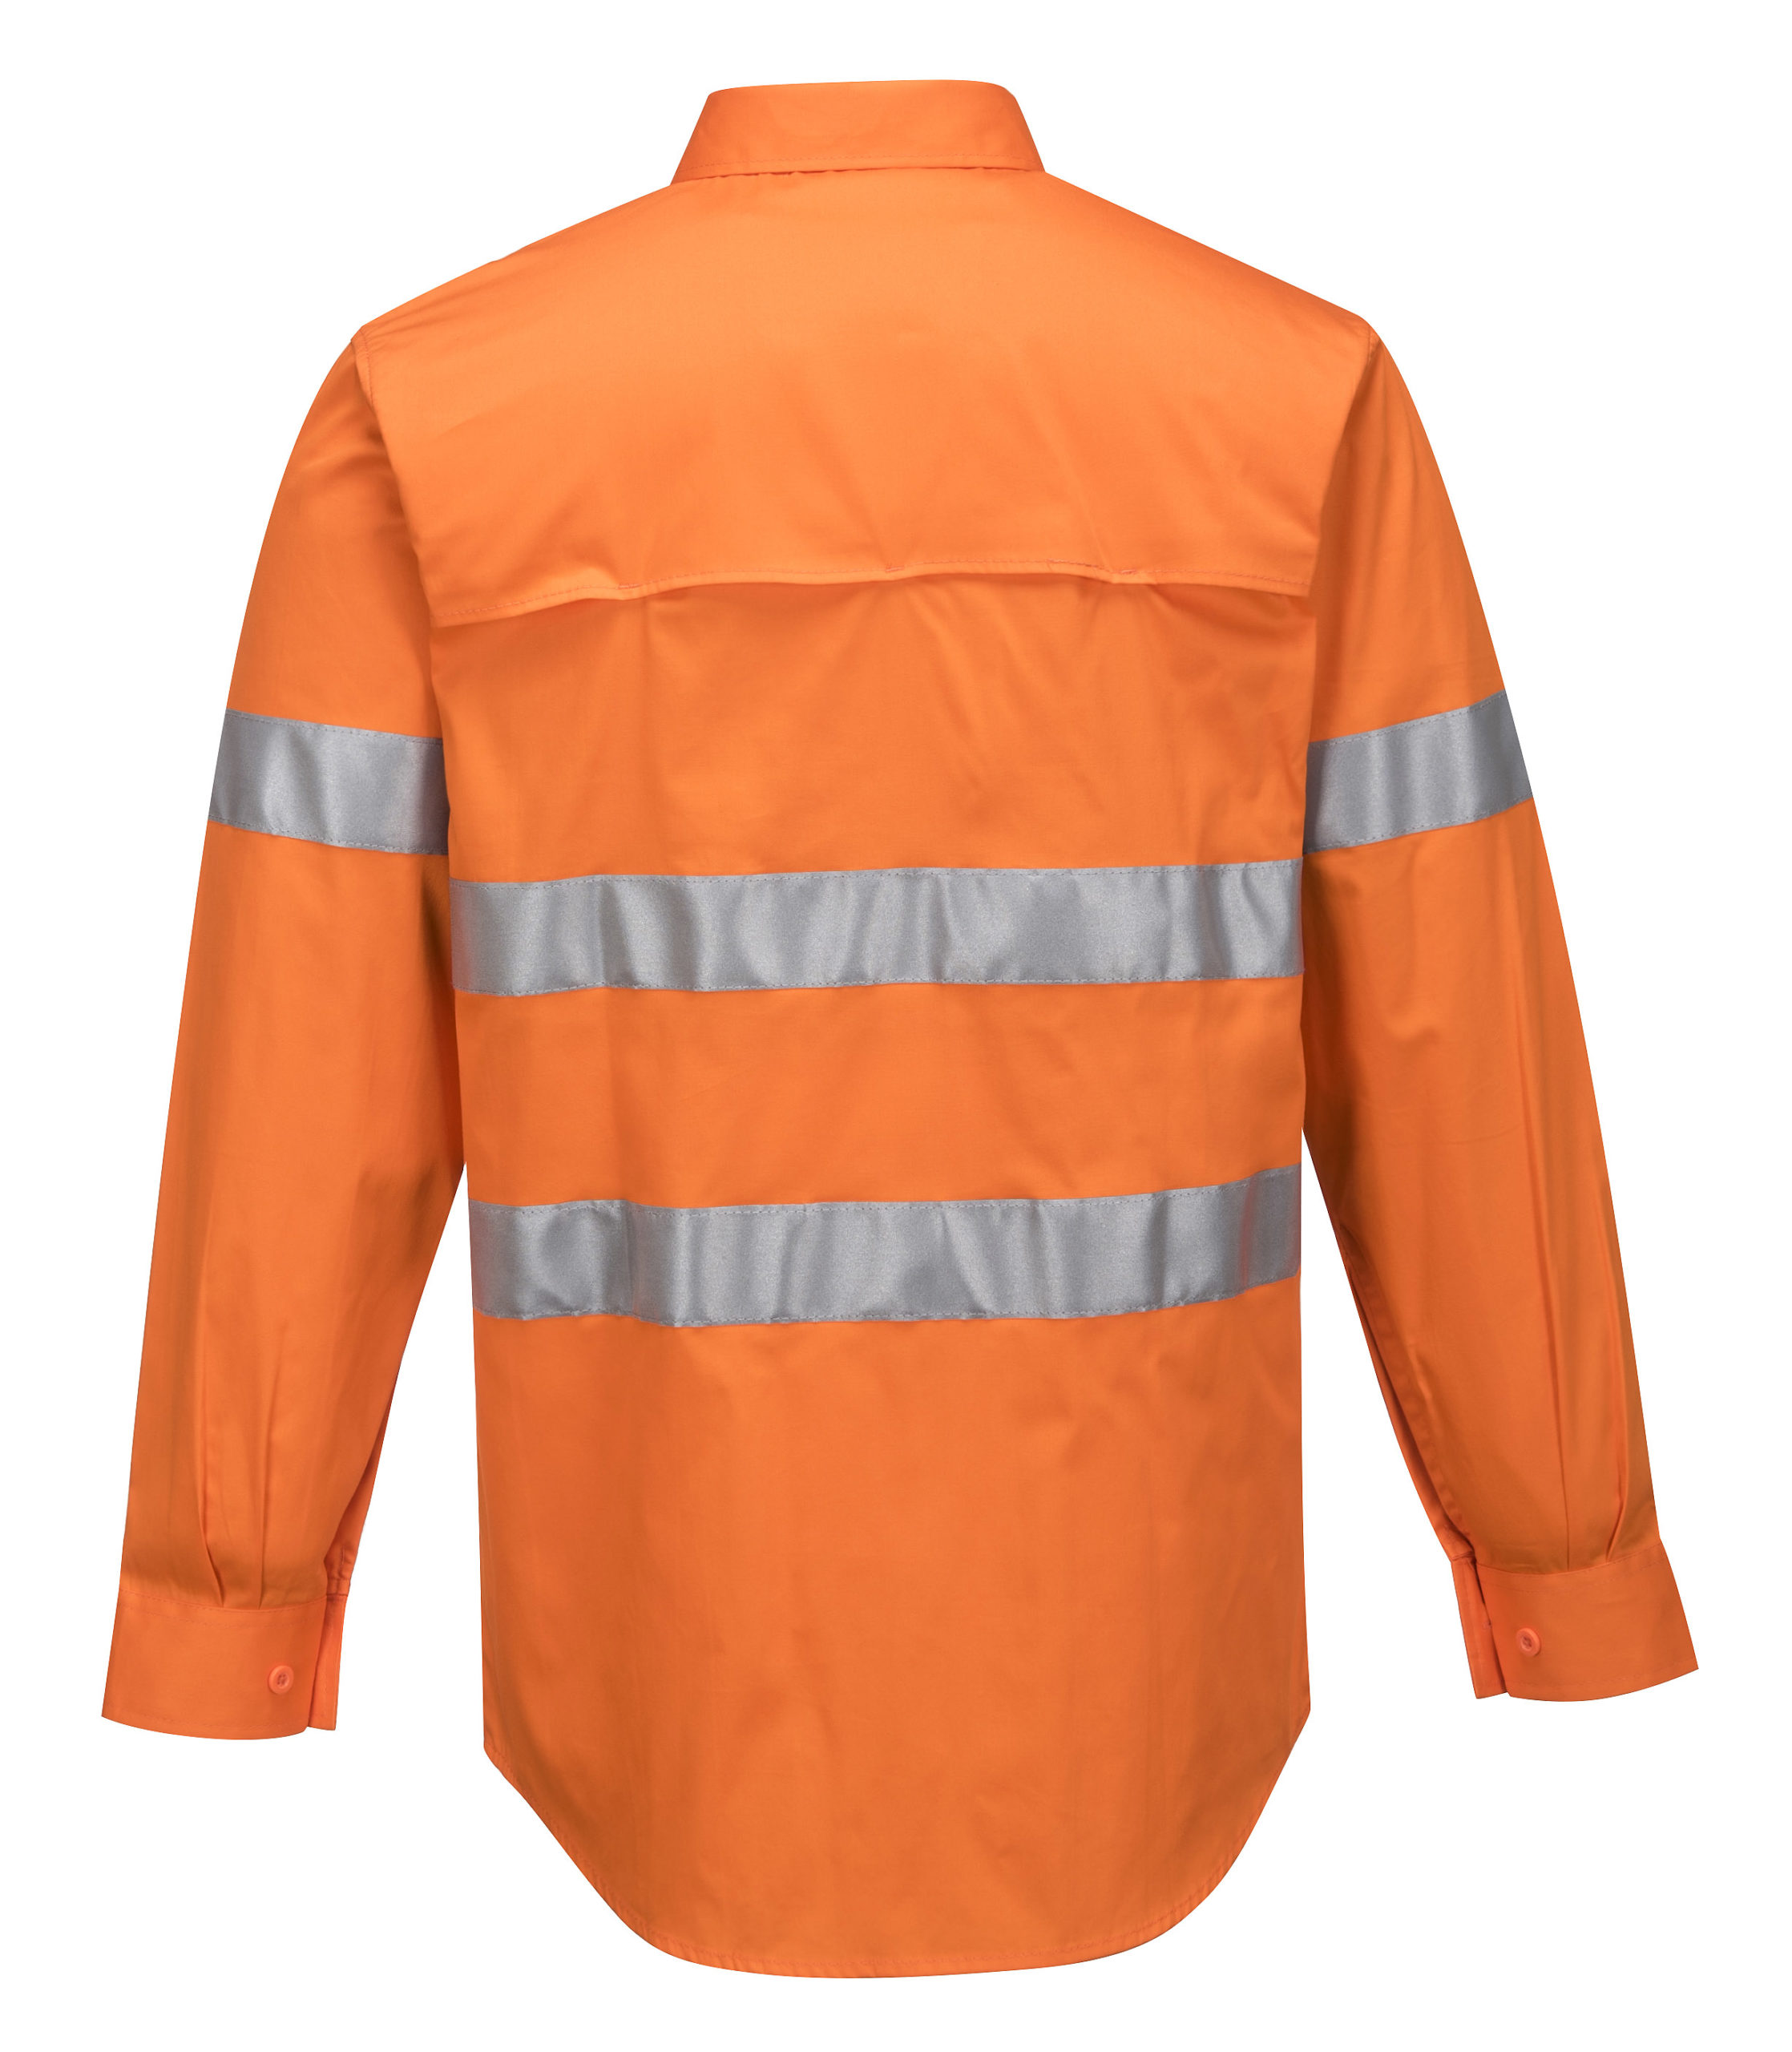 MA301 - Hi-Vis Lightweight Long Sleeve Shirt with Tape - Prime Mover ORG2